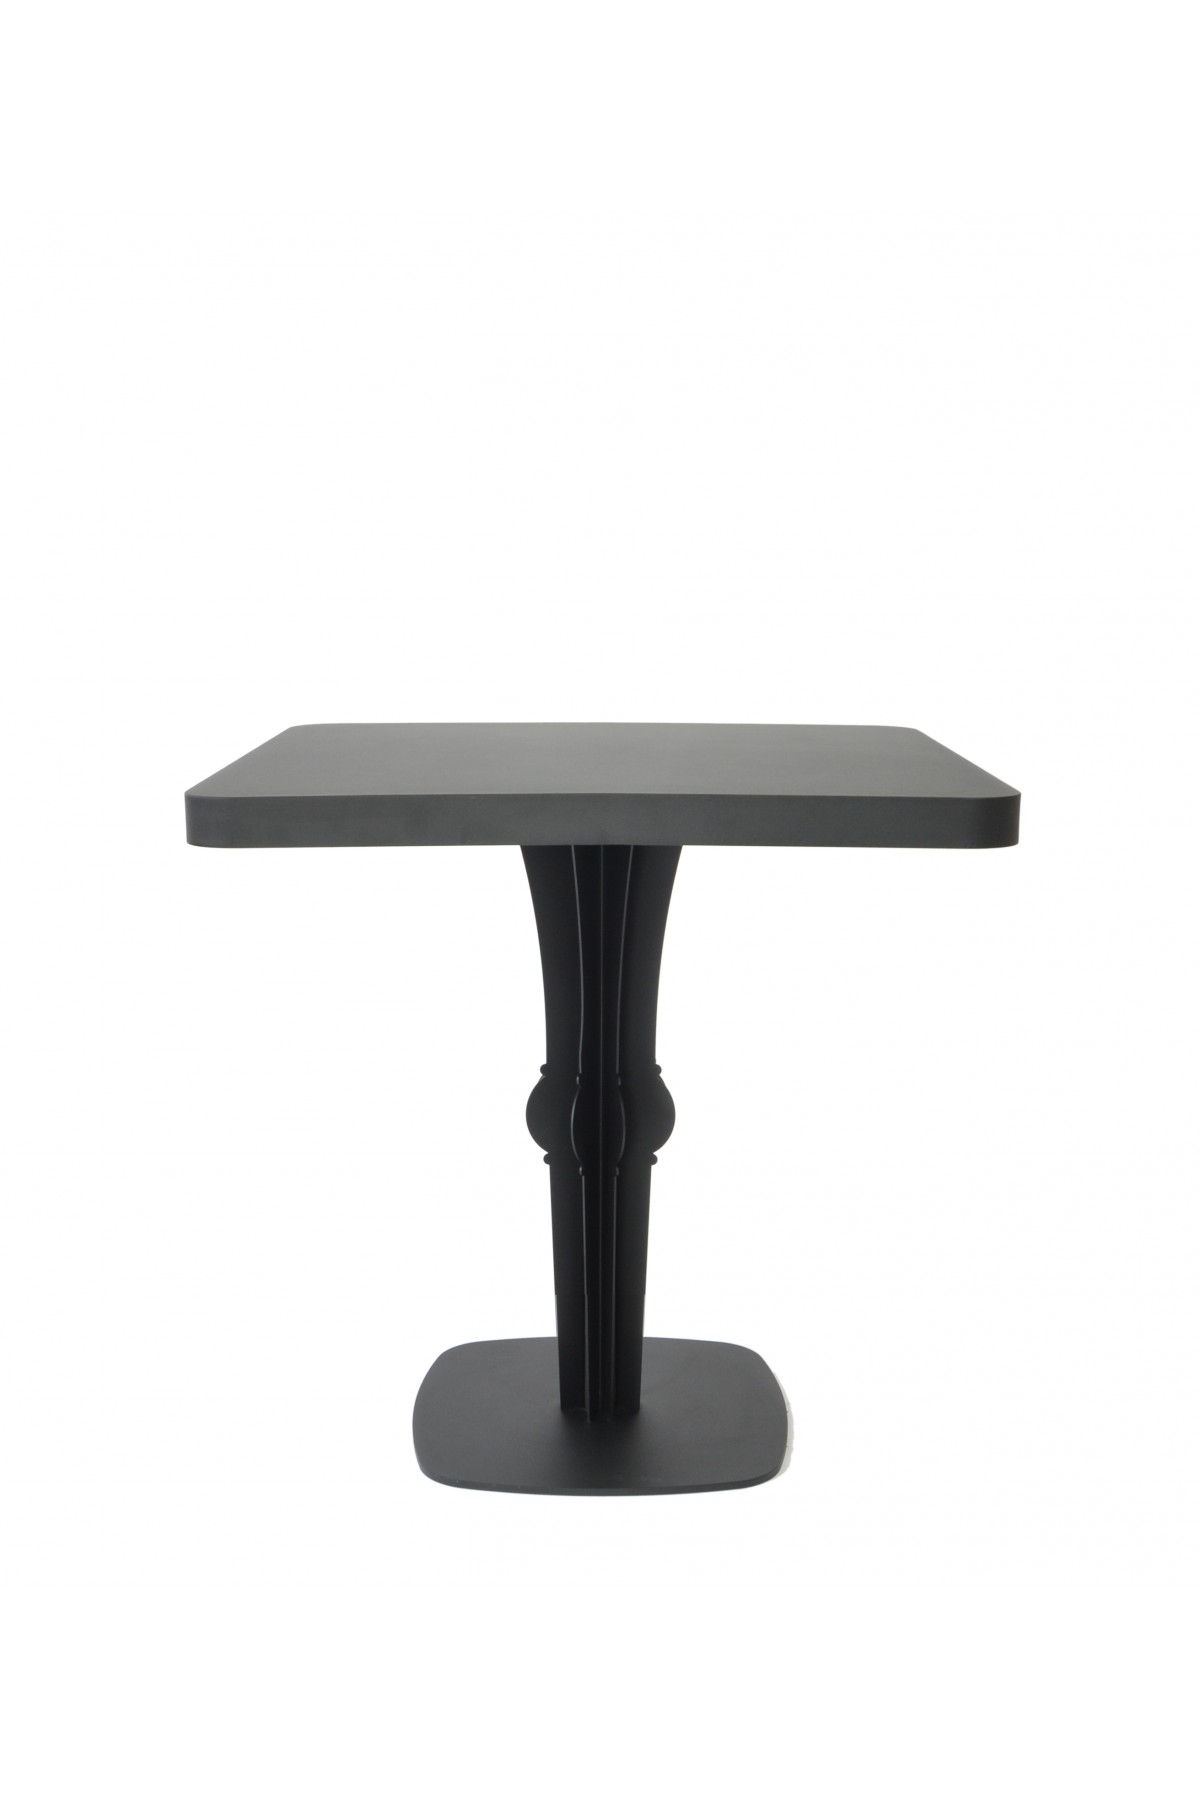 Round square table metal steel